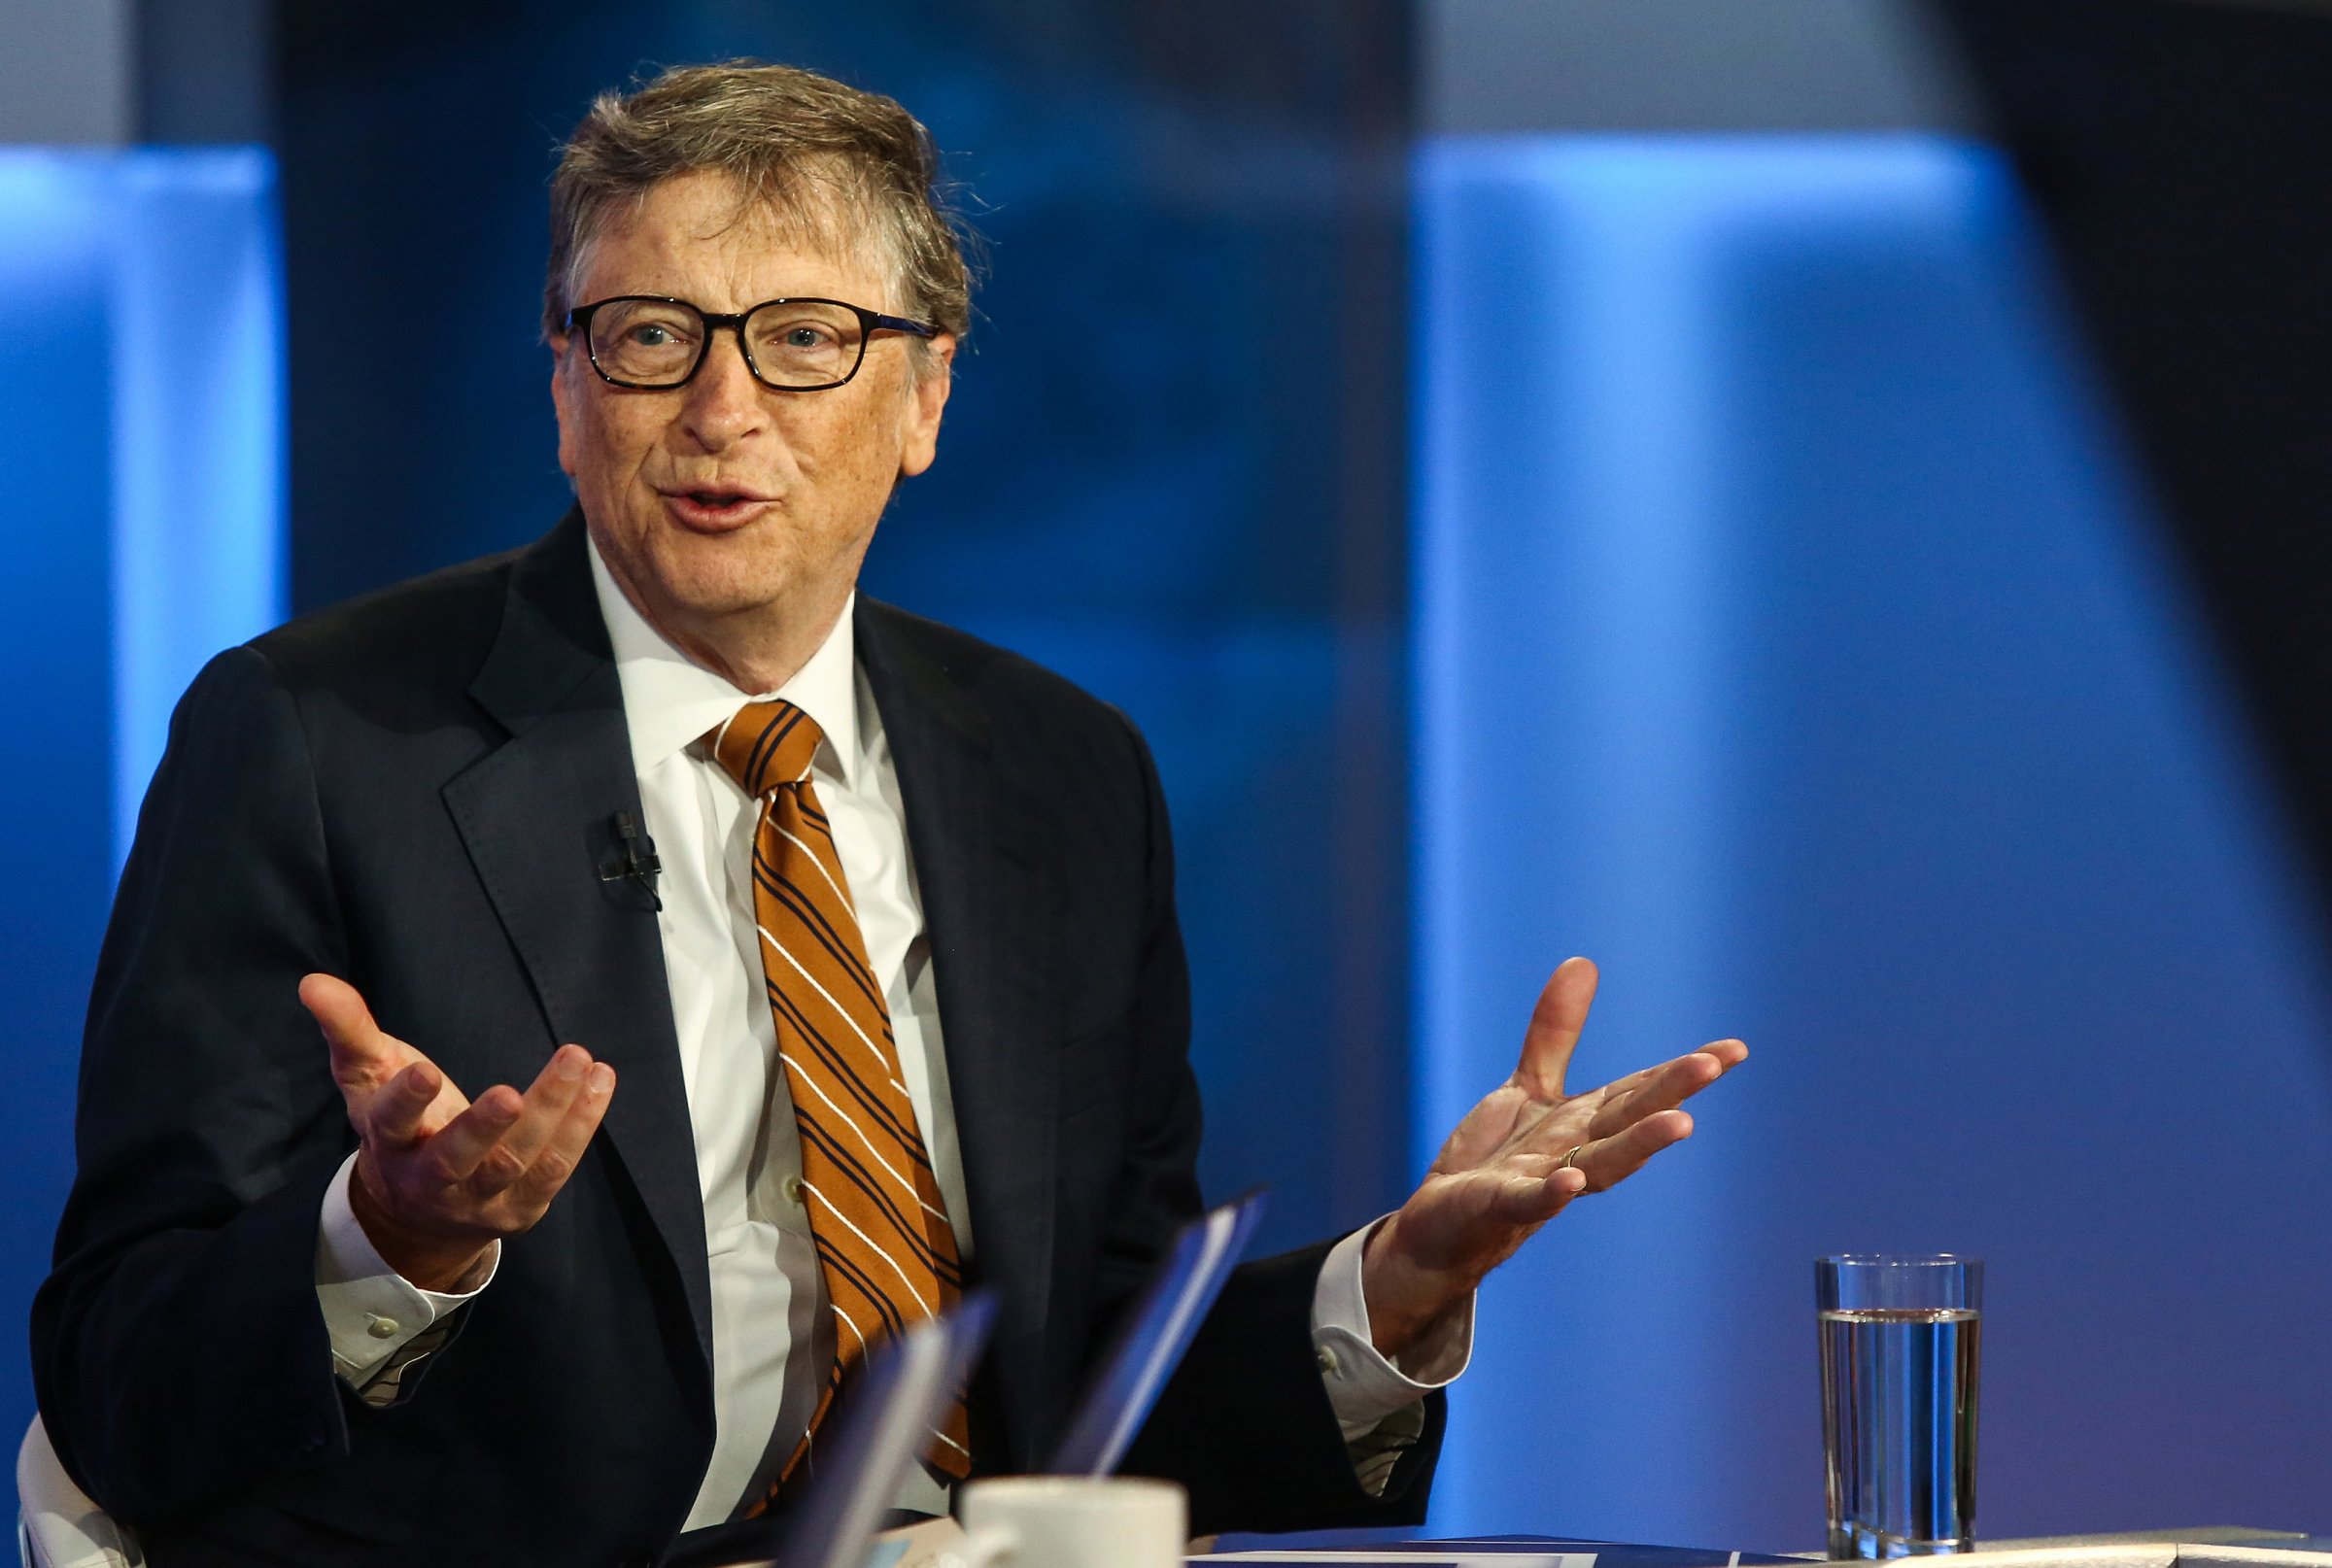 Bill Gates speaks during a Bloomberg Television interview in New York on Feb. 23, 2016.